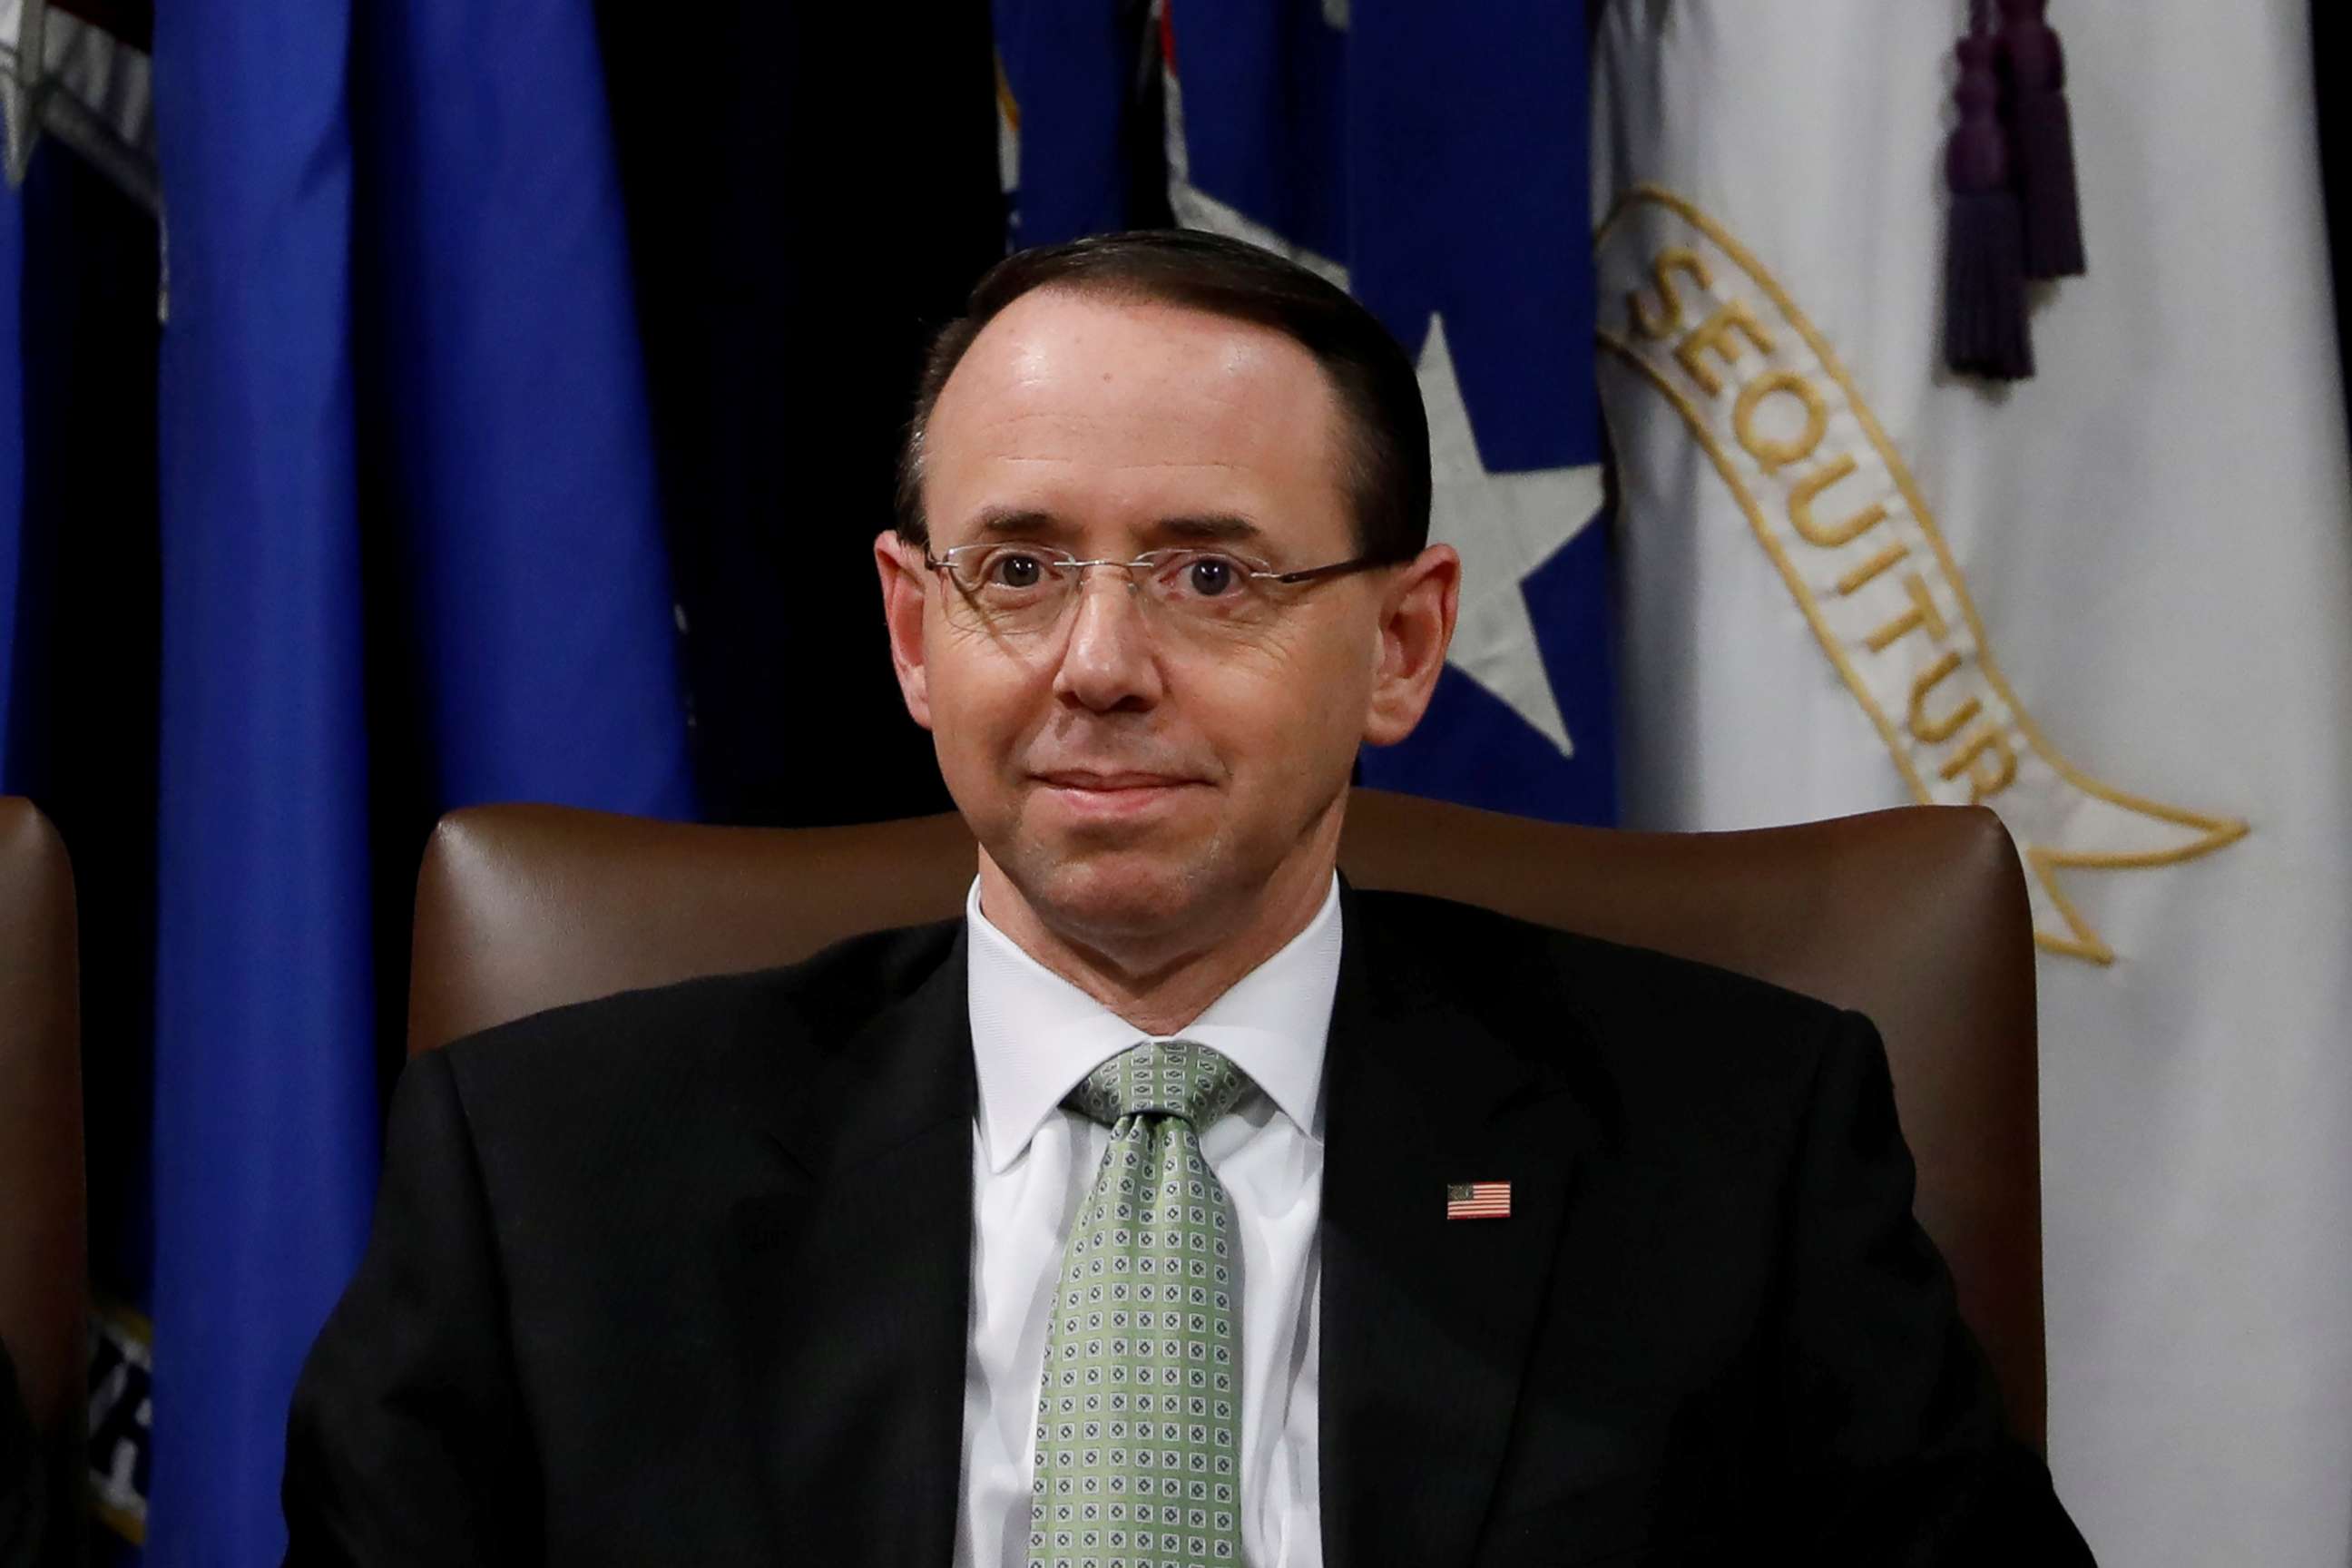 PHOTO: U.S. Deputy Attorney General Rod Rosenstein looks on at a summit about combating human trafficking at the Department of Justice in Washington, D.C., Feb. 2, 2018.